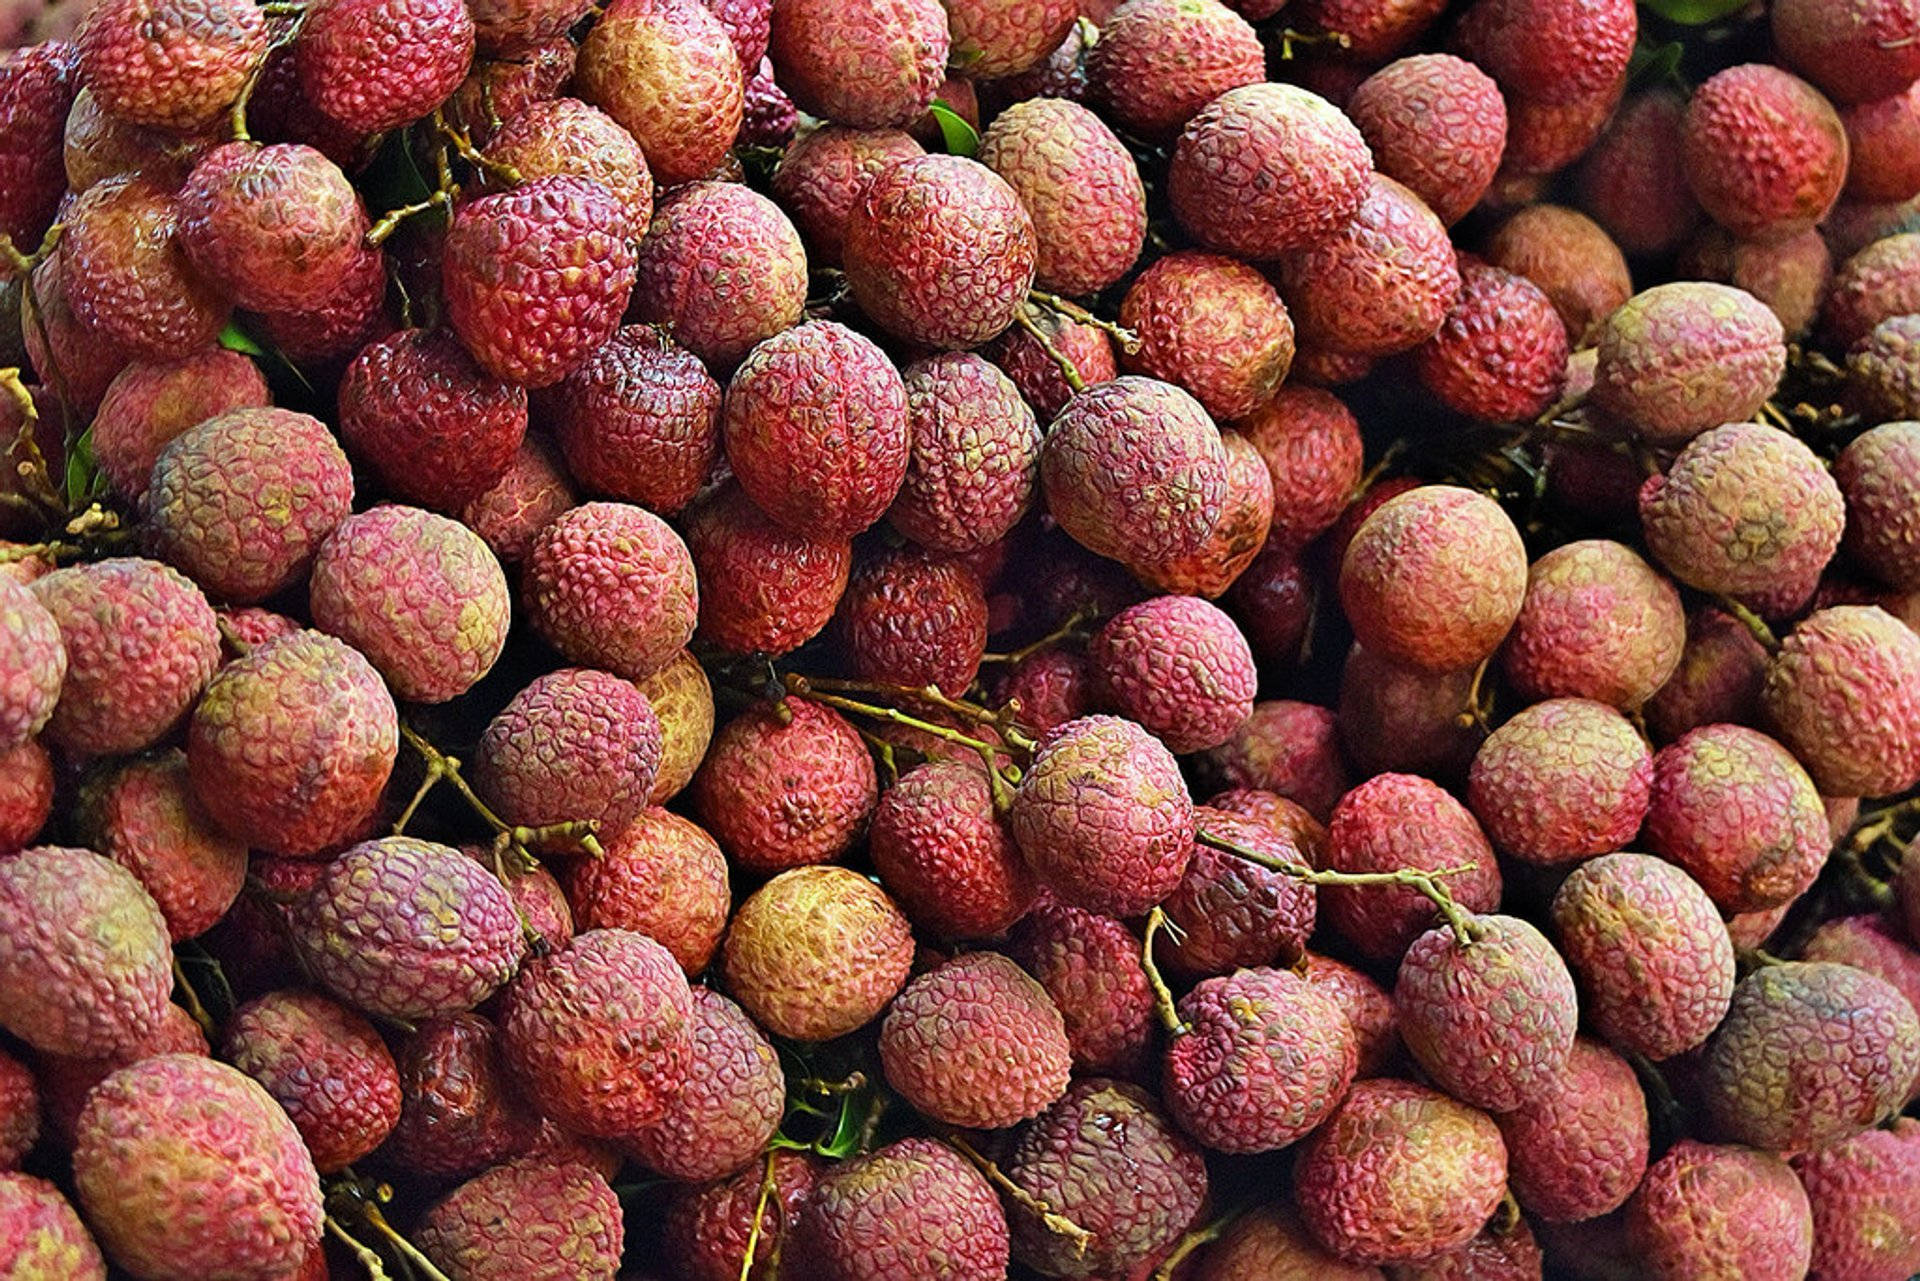 New Litchis Produce